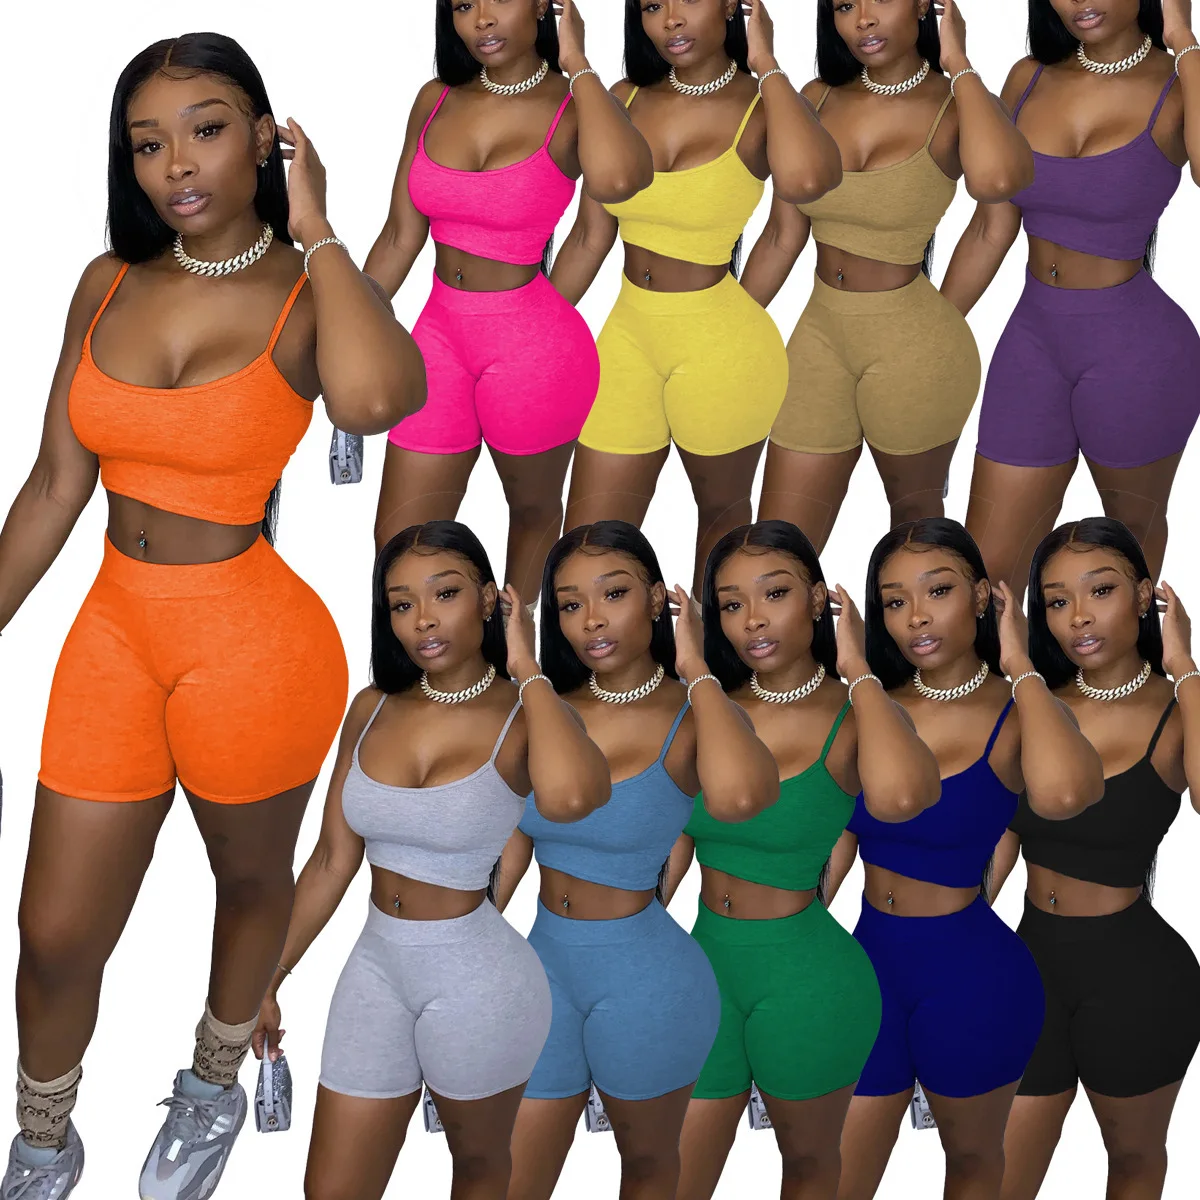 

2022 new arrivals two piece biker short set Women's Summer Sets matching solid joggers women s 2 peice outfits, 10 color